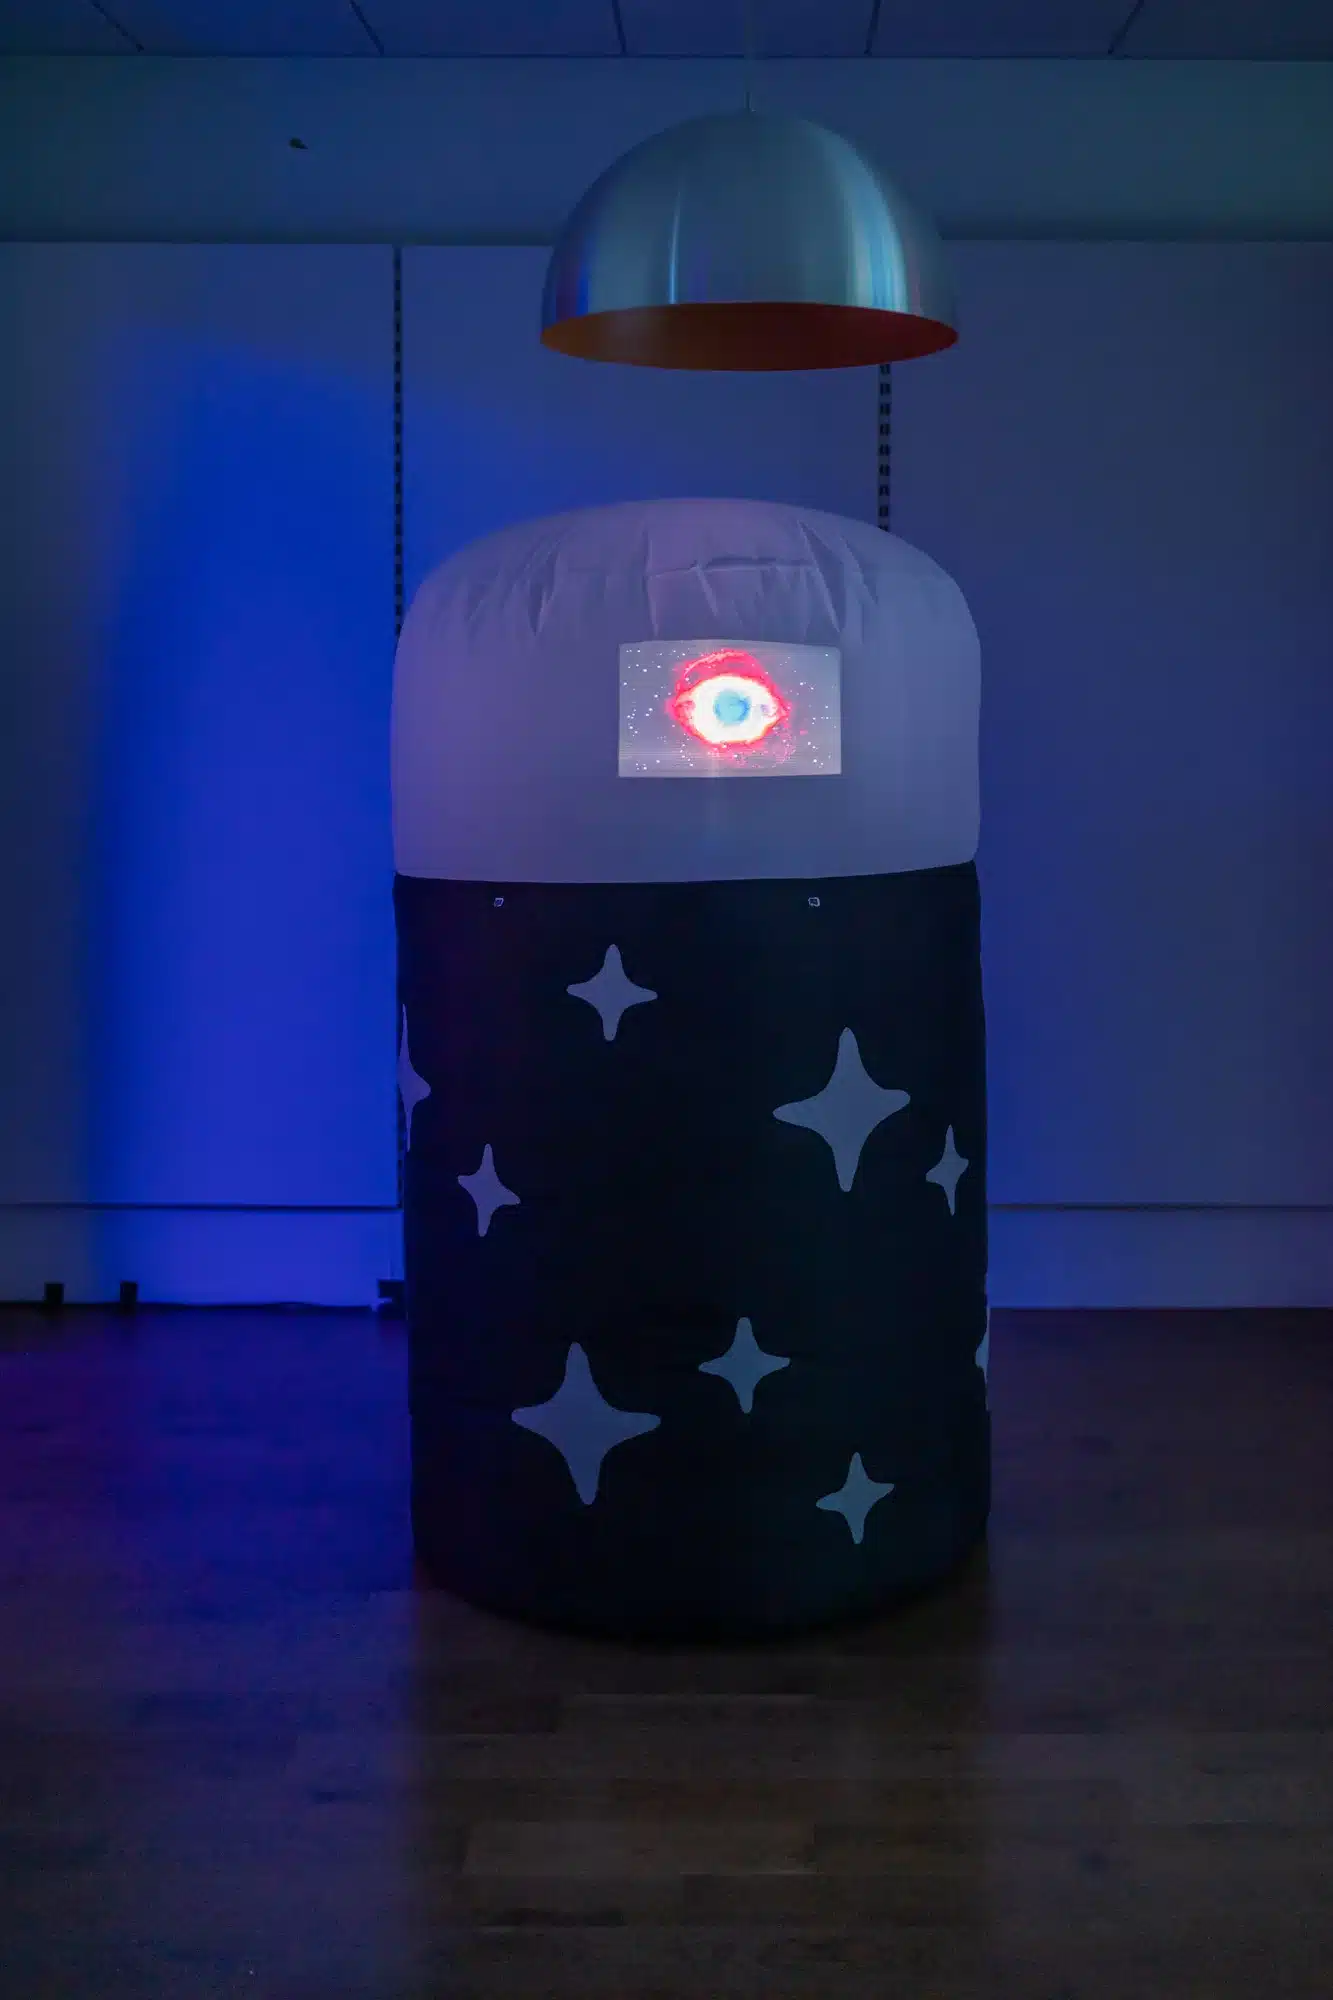 A large cylindrical structure stands in a room filled with blue light. The sculpture is formed using fabric that is inflated from the inside. The lower two thirds of the cylinder is black, scattered with stars of varying sizes. The top third is white. In the center of the top third, a video projected of a large, glowing eye.